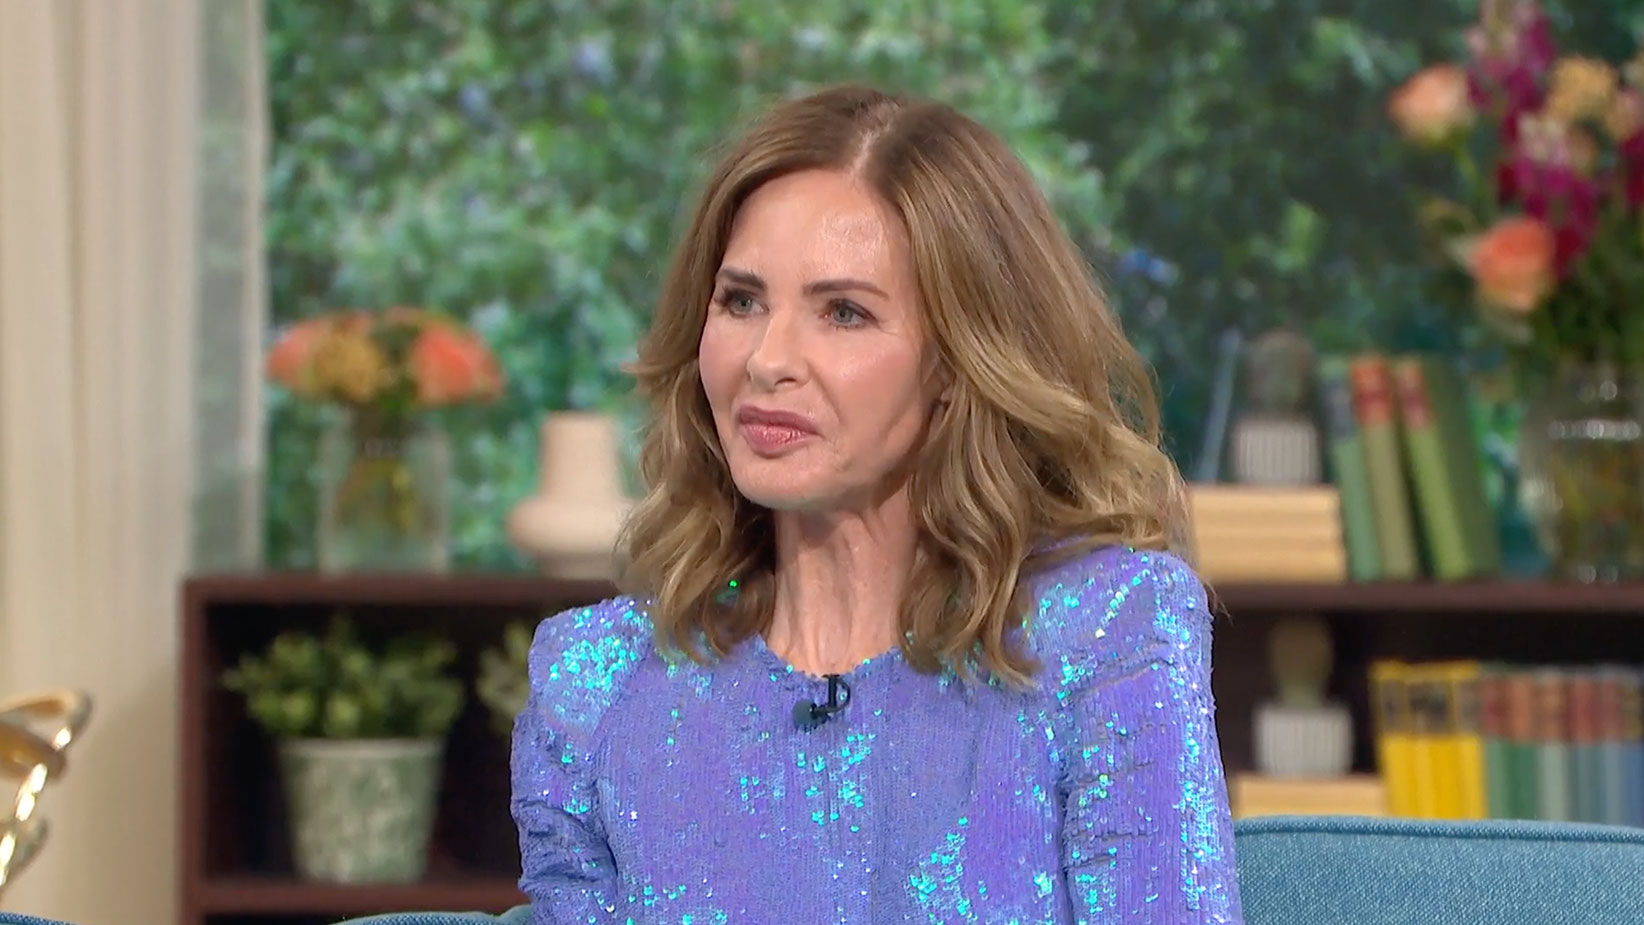 Trinny Woodall discusses the release of her new book